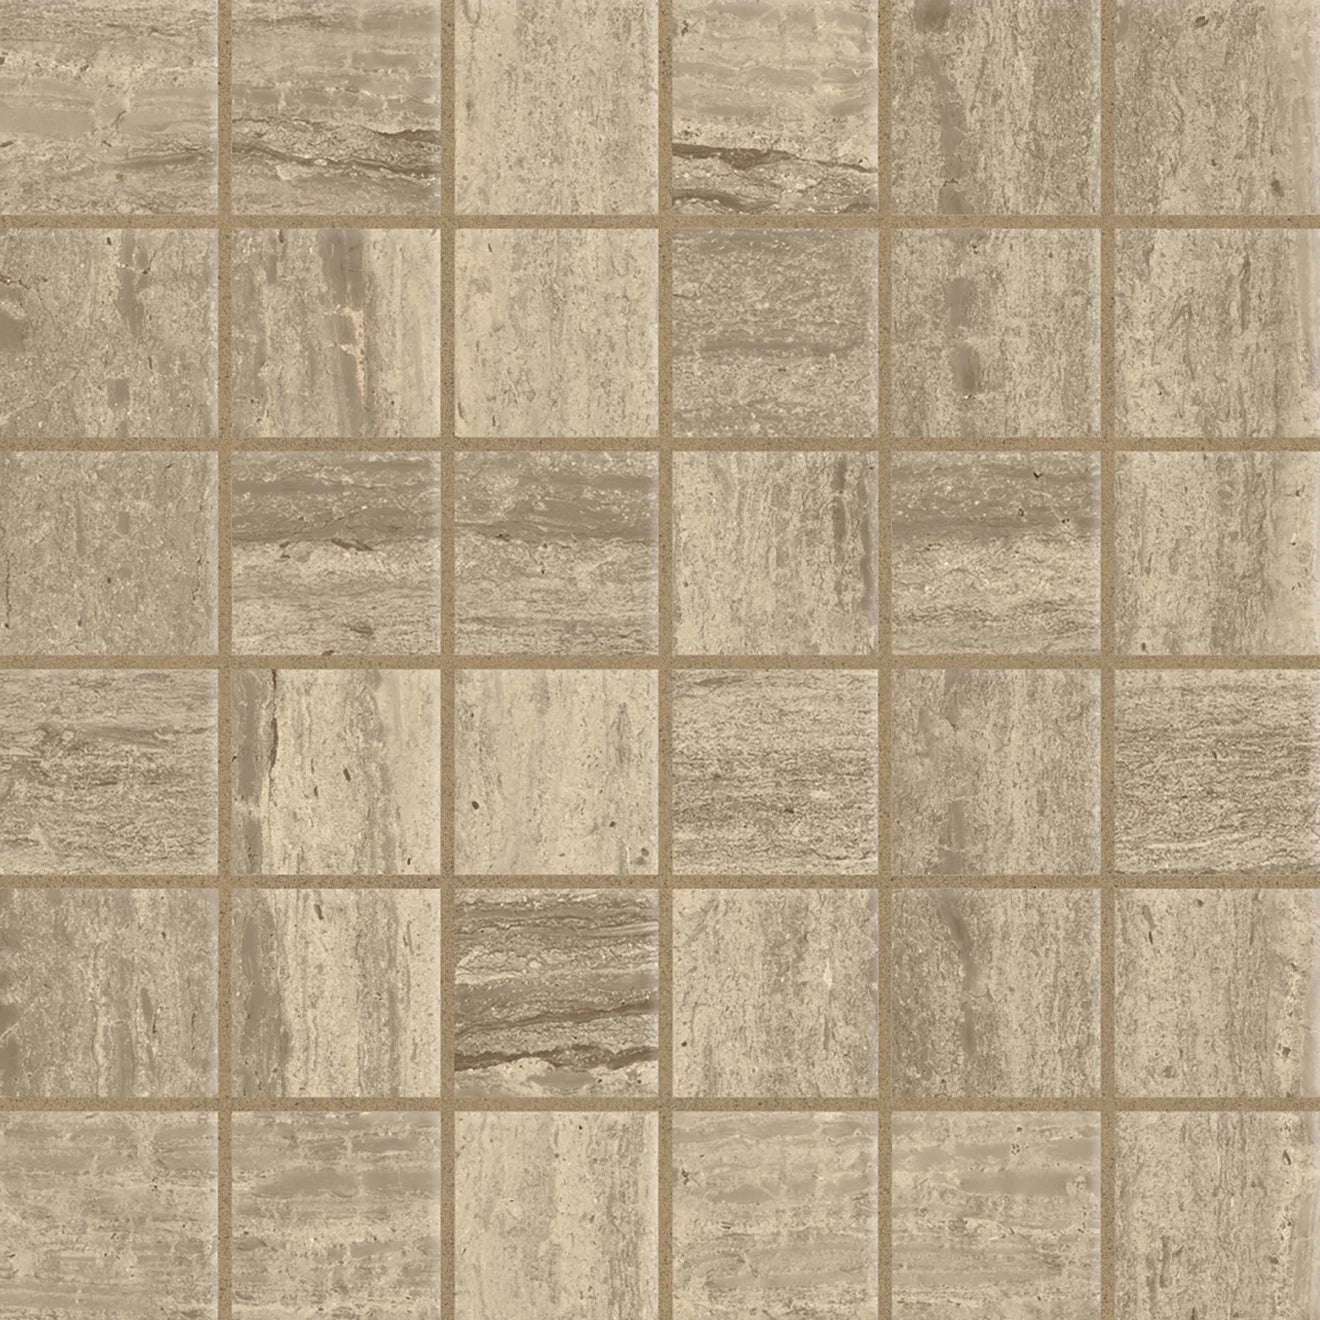 Classic 2.0 2" x 2" Square Floor & Wall Mosaic Tile